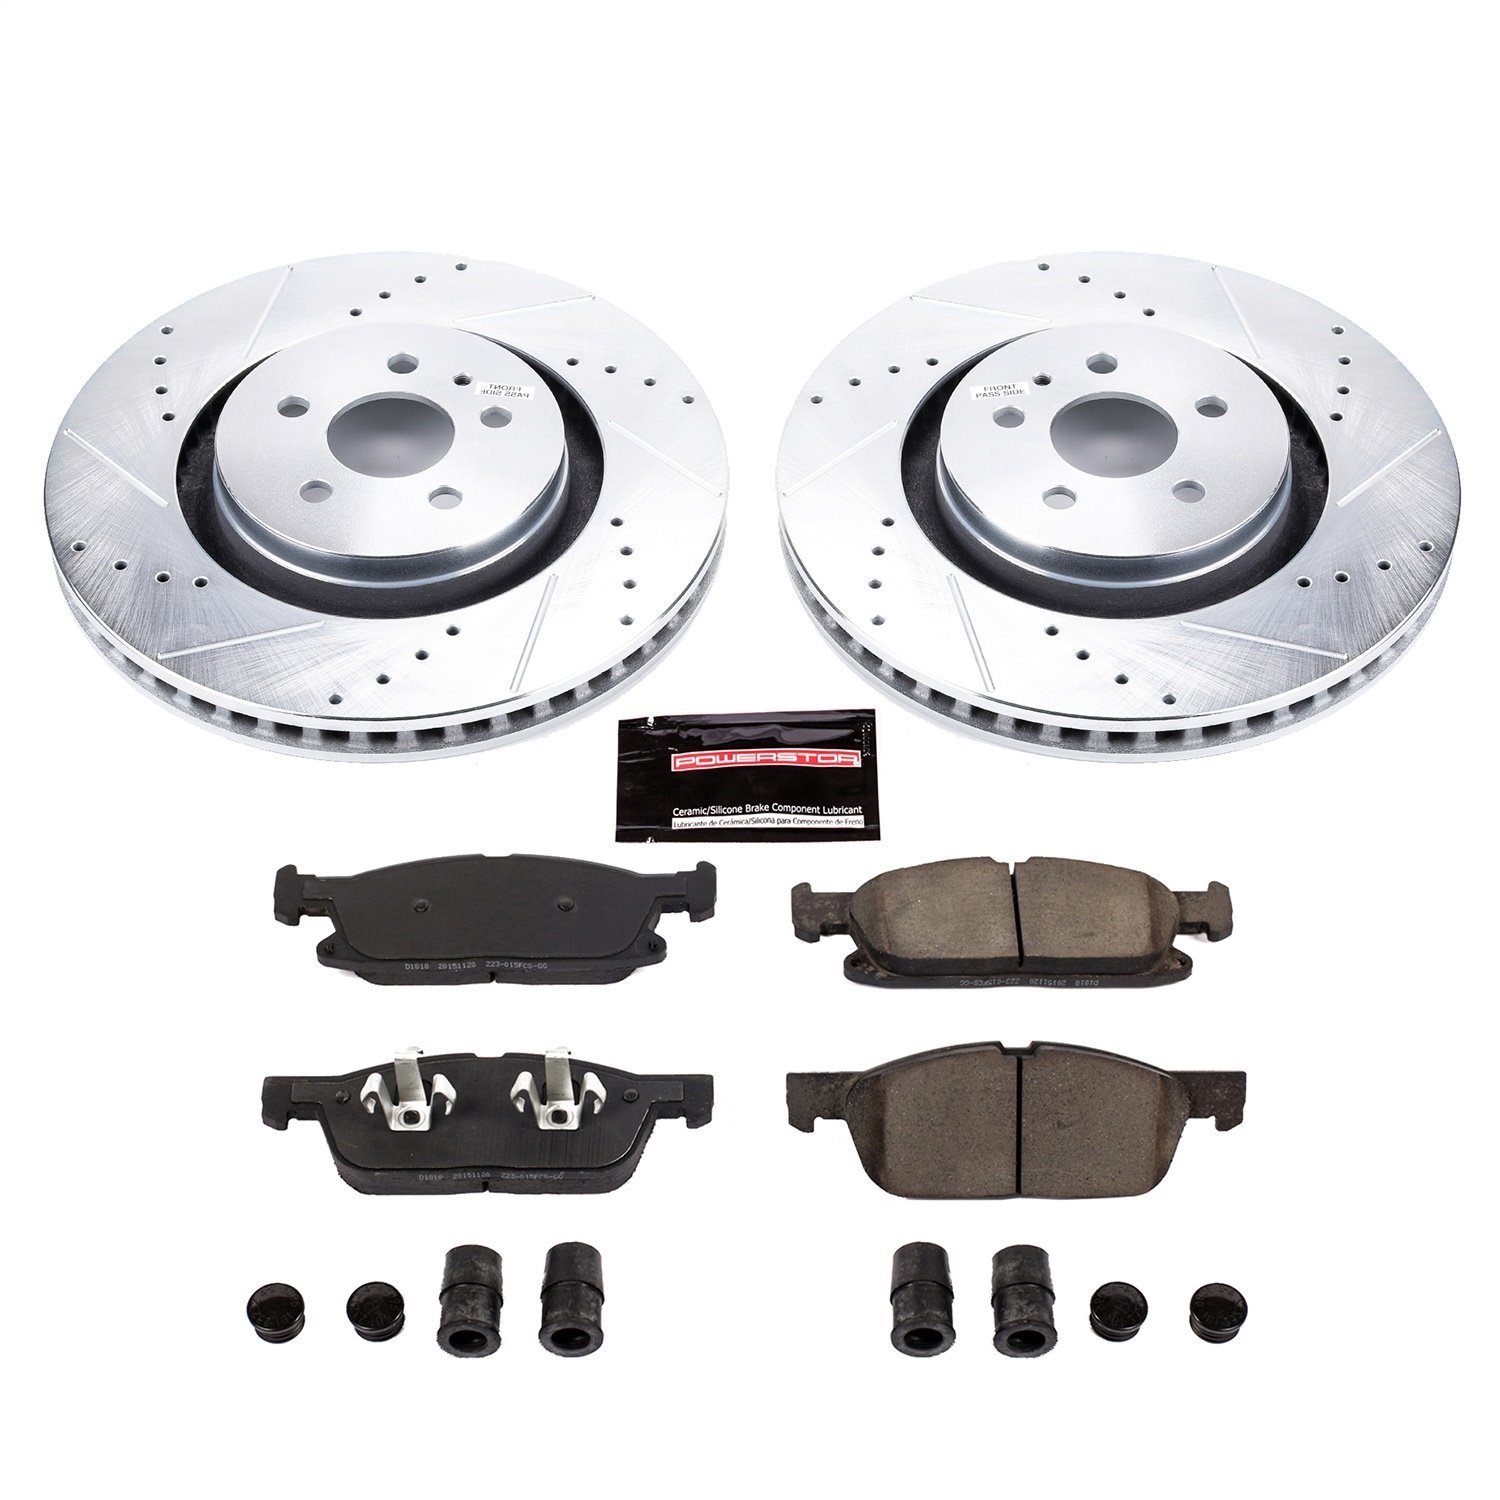 Z23 Front Brake Pads and Rotors Kit Fits Select Ford, Lincoln Models